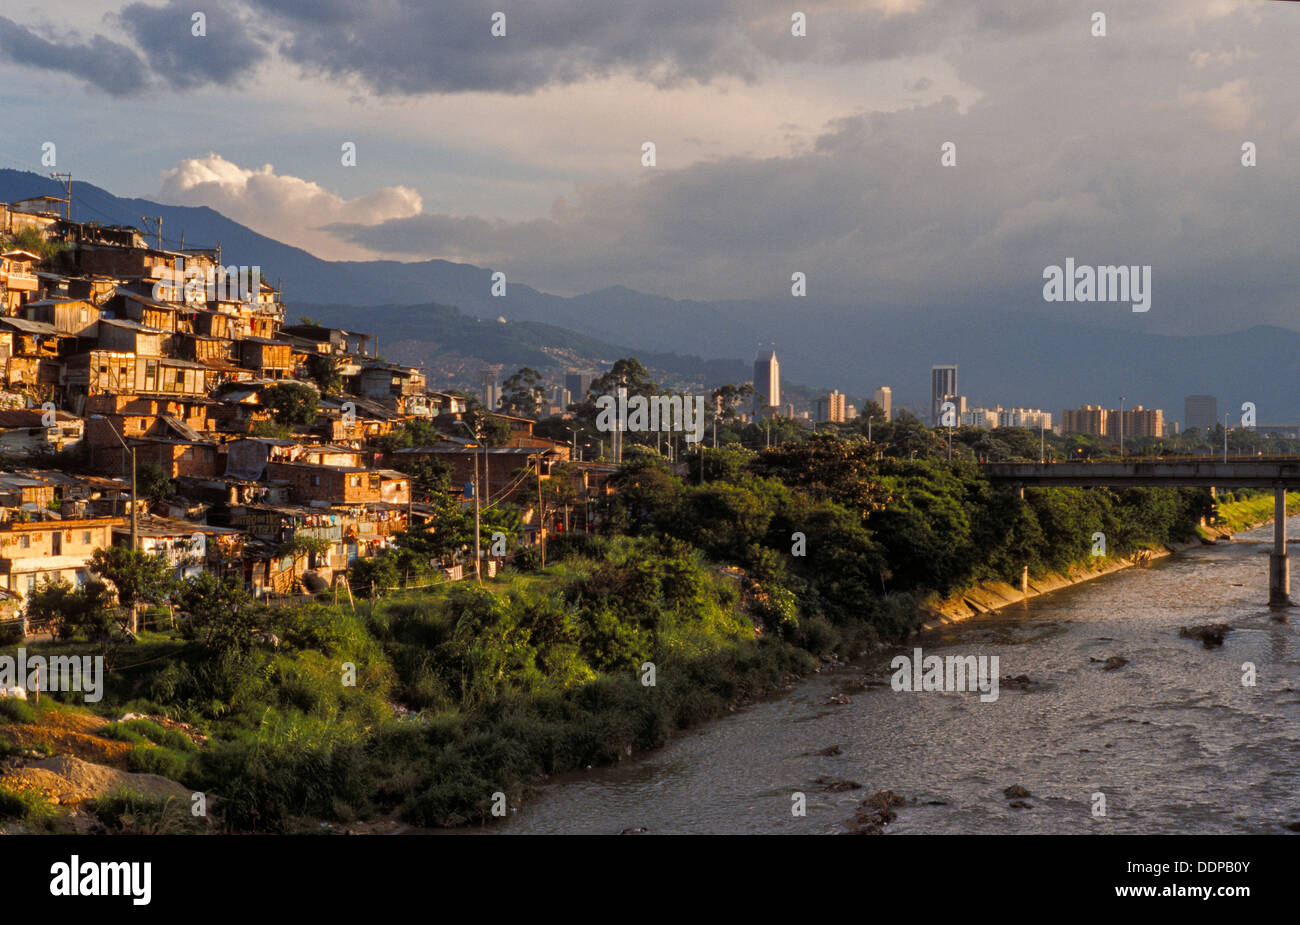 Poor neighborhood close to the center of Medellin, Colombia Stock Photo